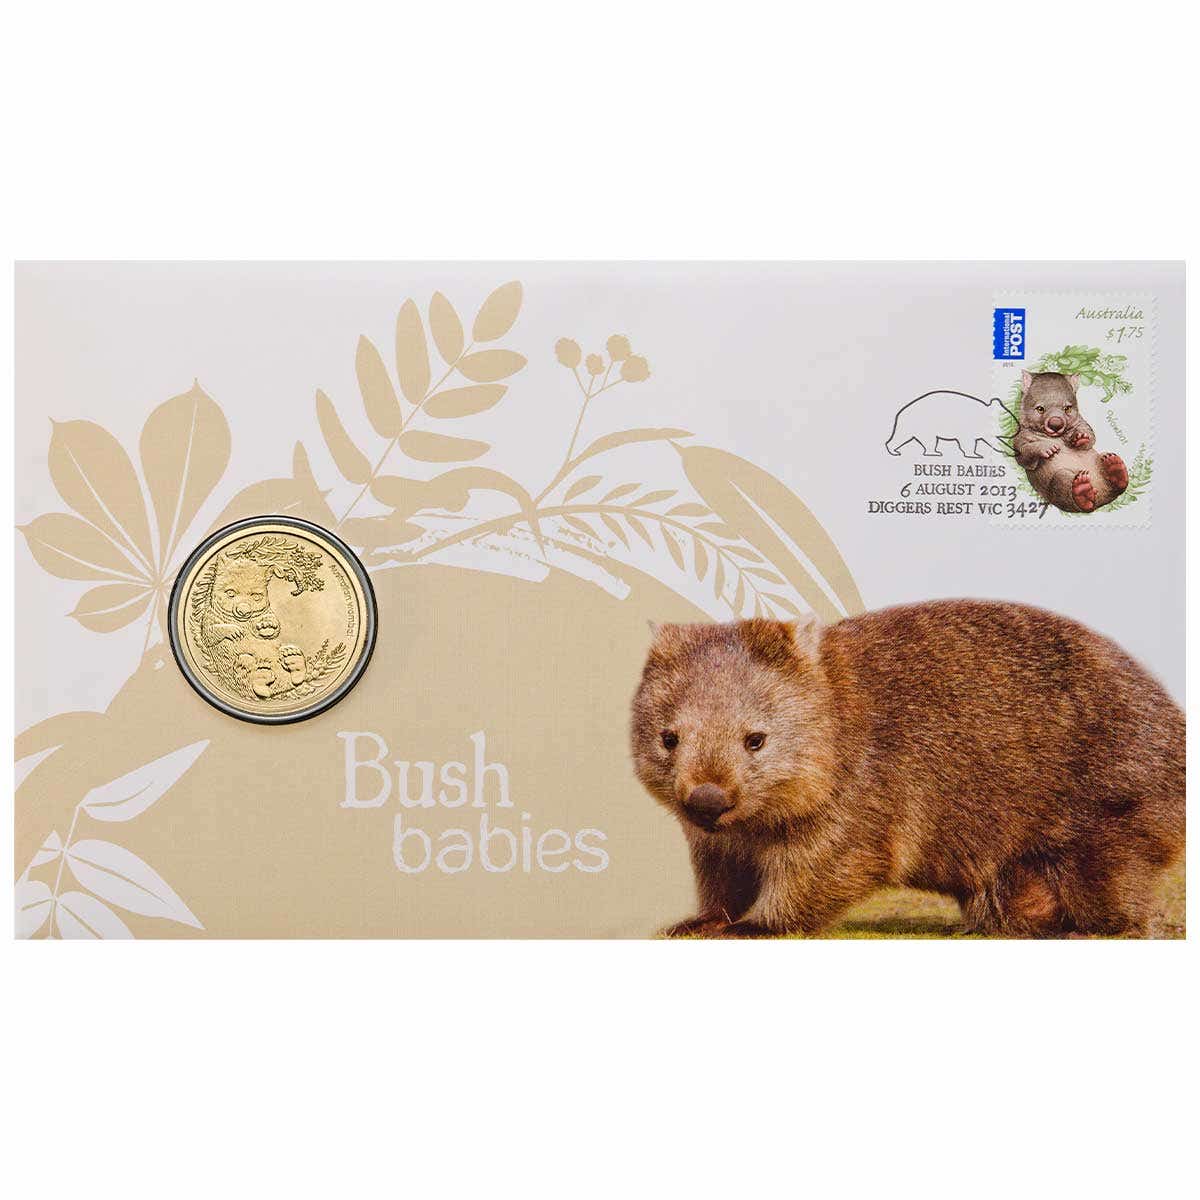 Bush Babies Wombat 2013 $1 Stamp & Coin Cover